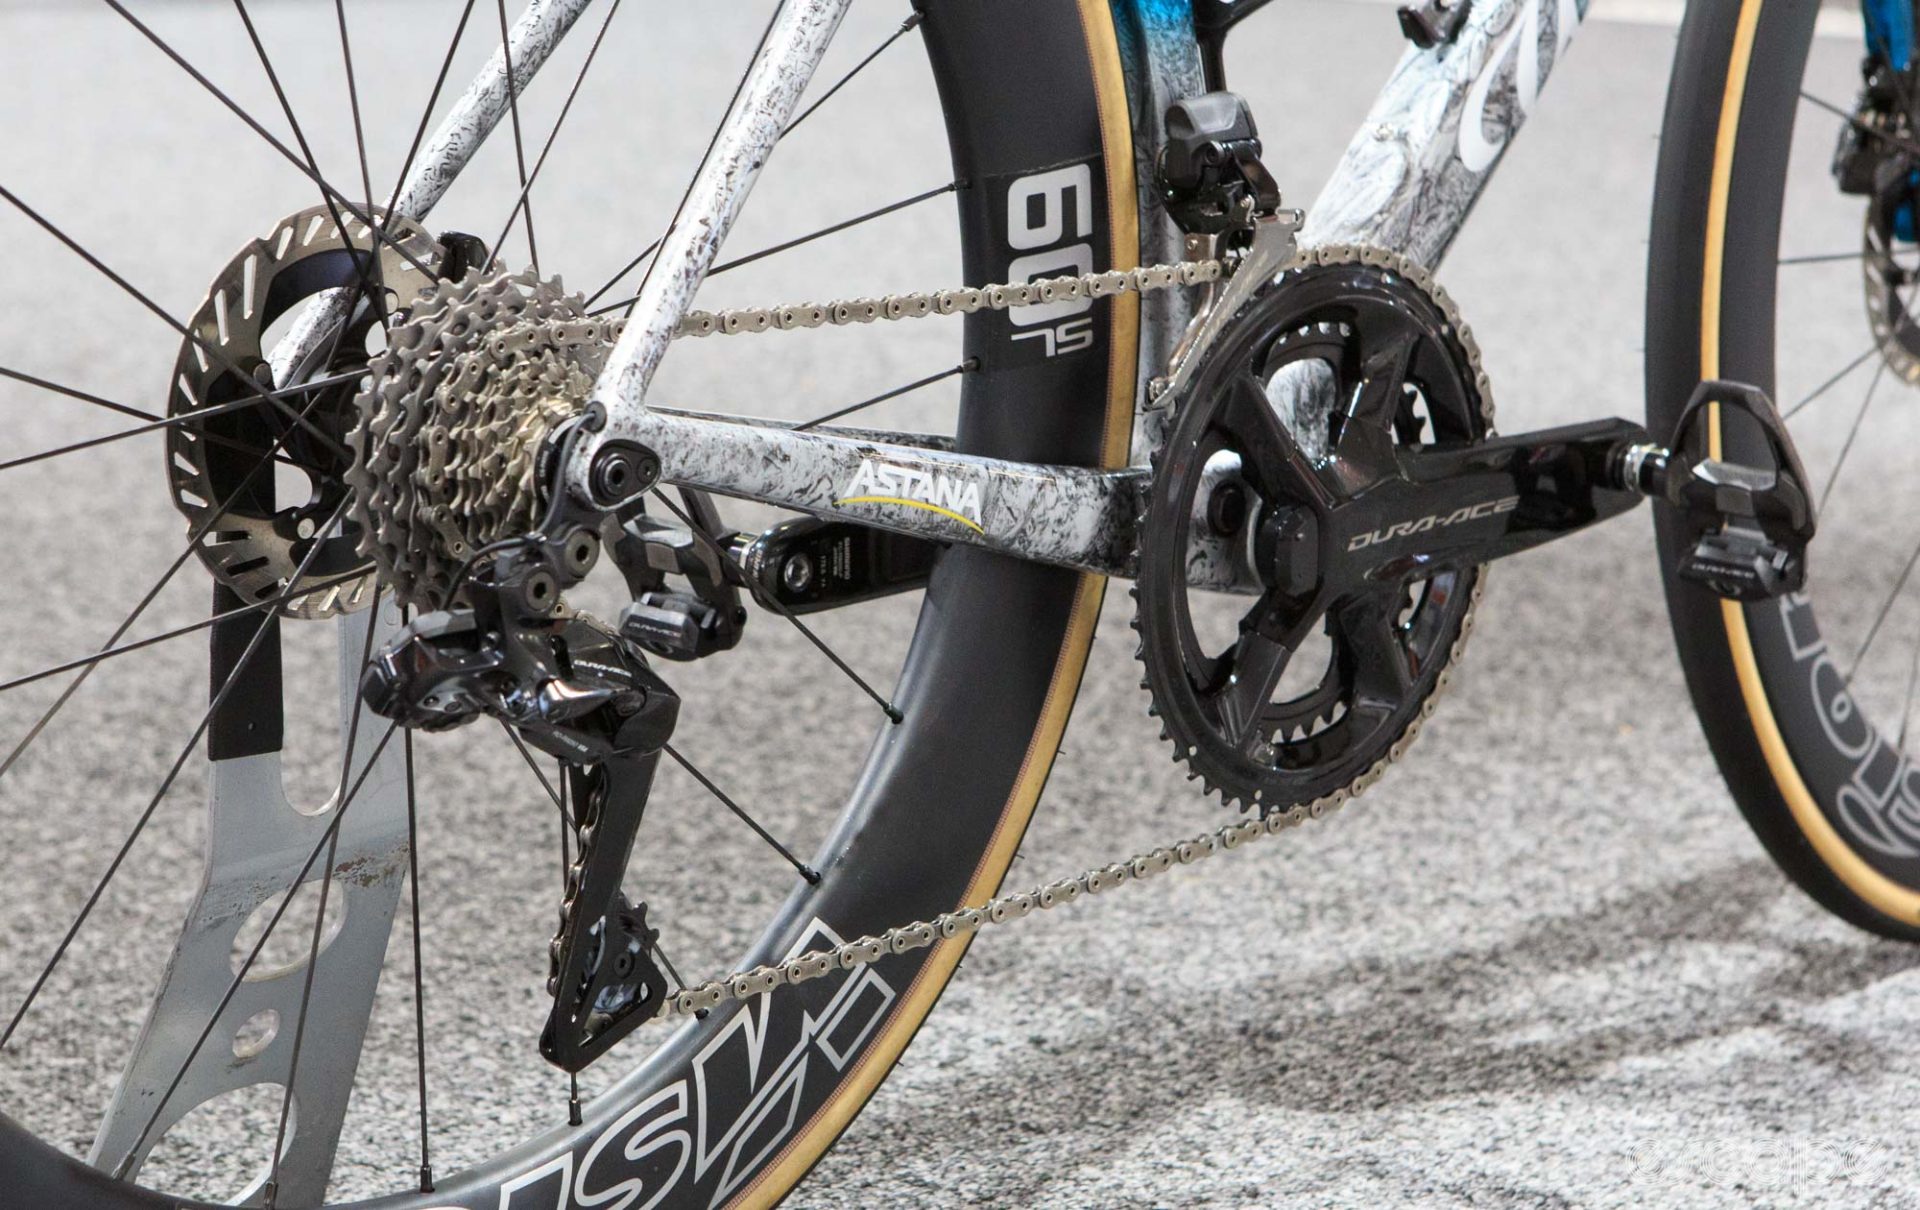 Shimano Dura-Ace groupset and Vision wheels.